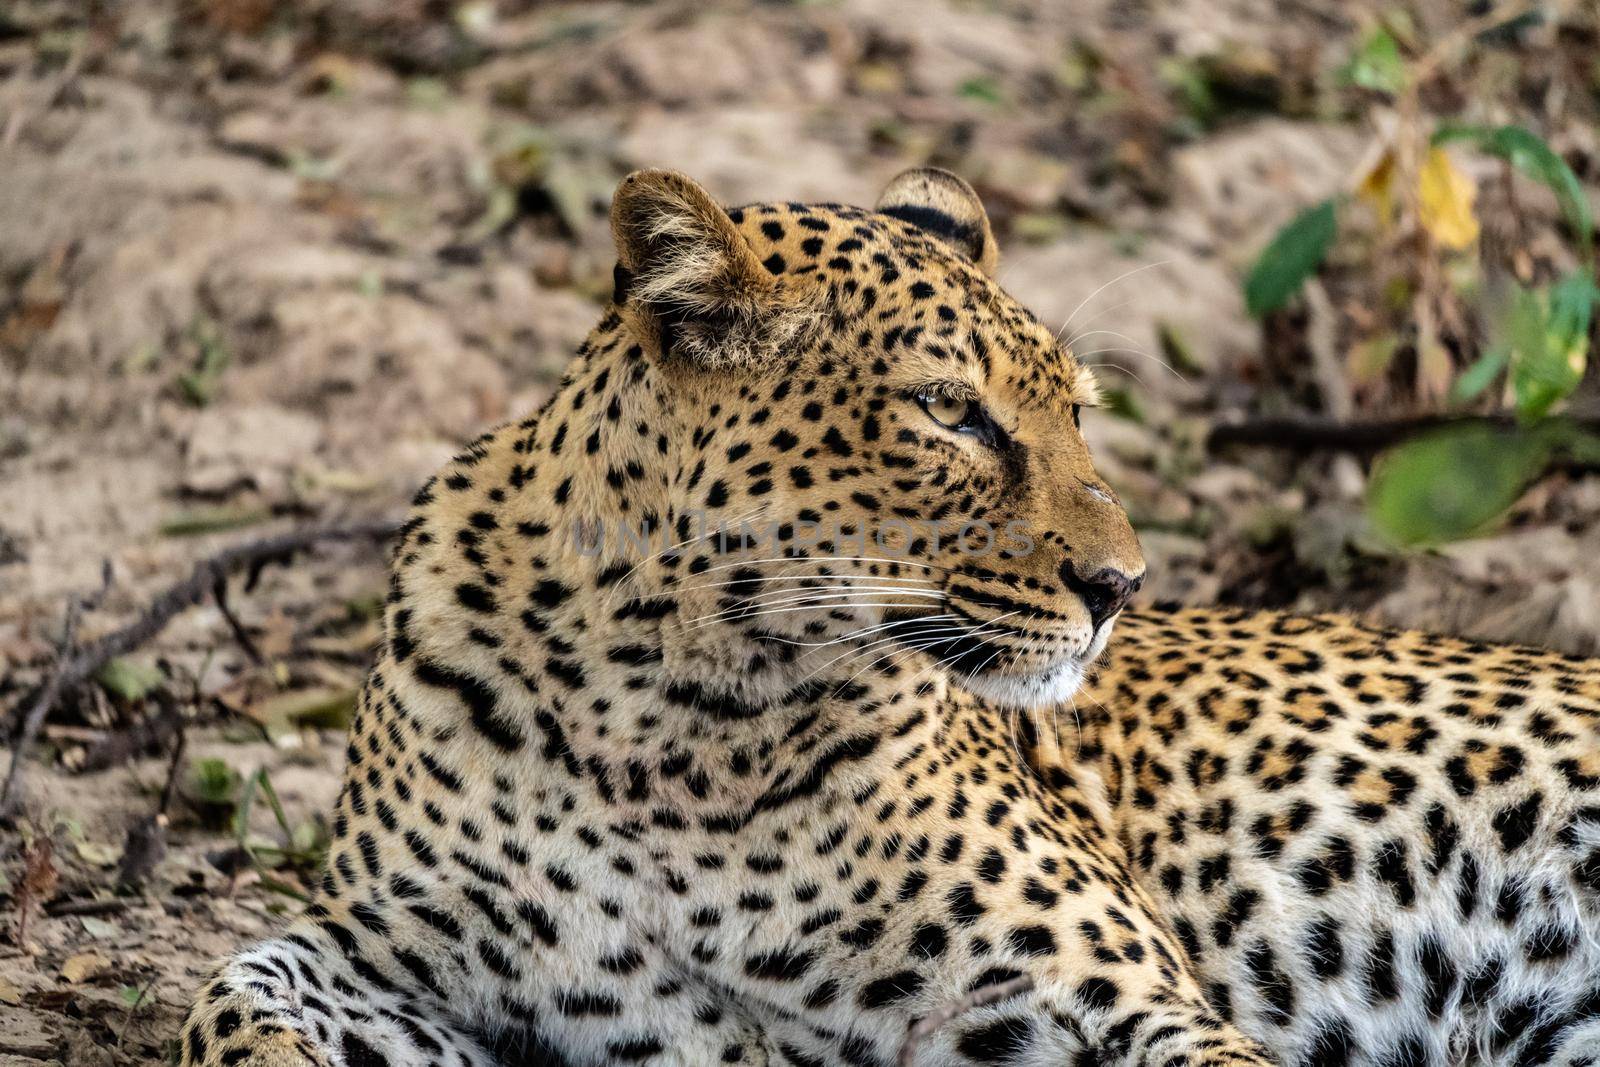 A close-up of a leopard resting in the bush after eating